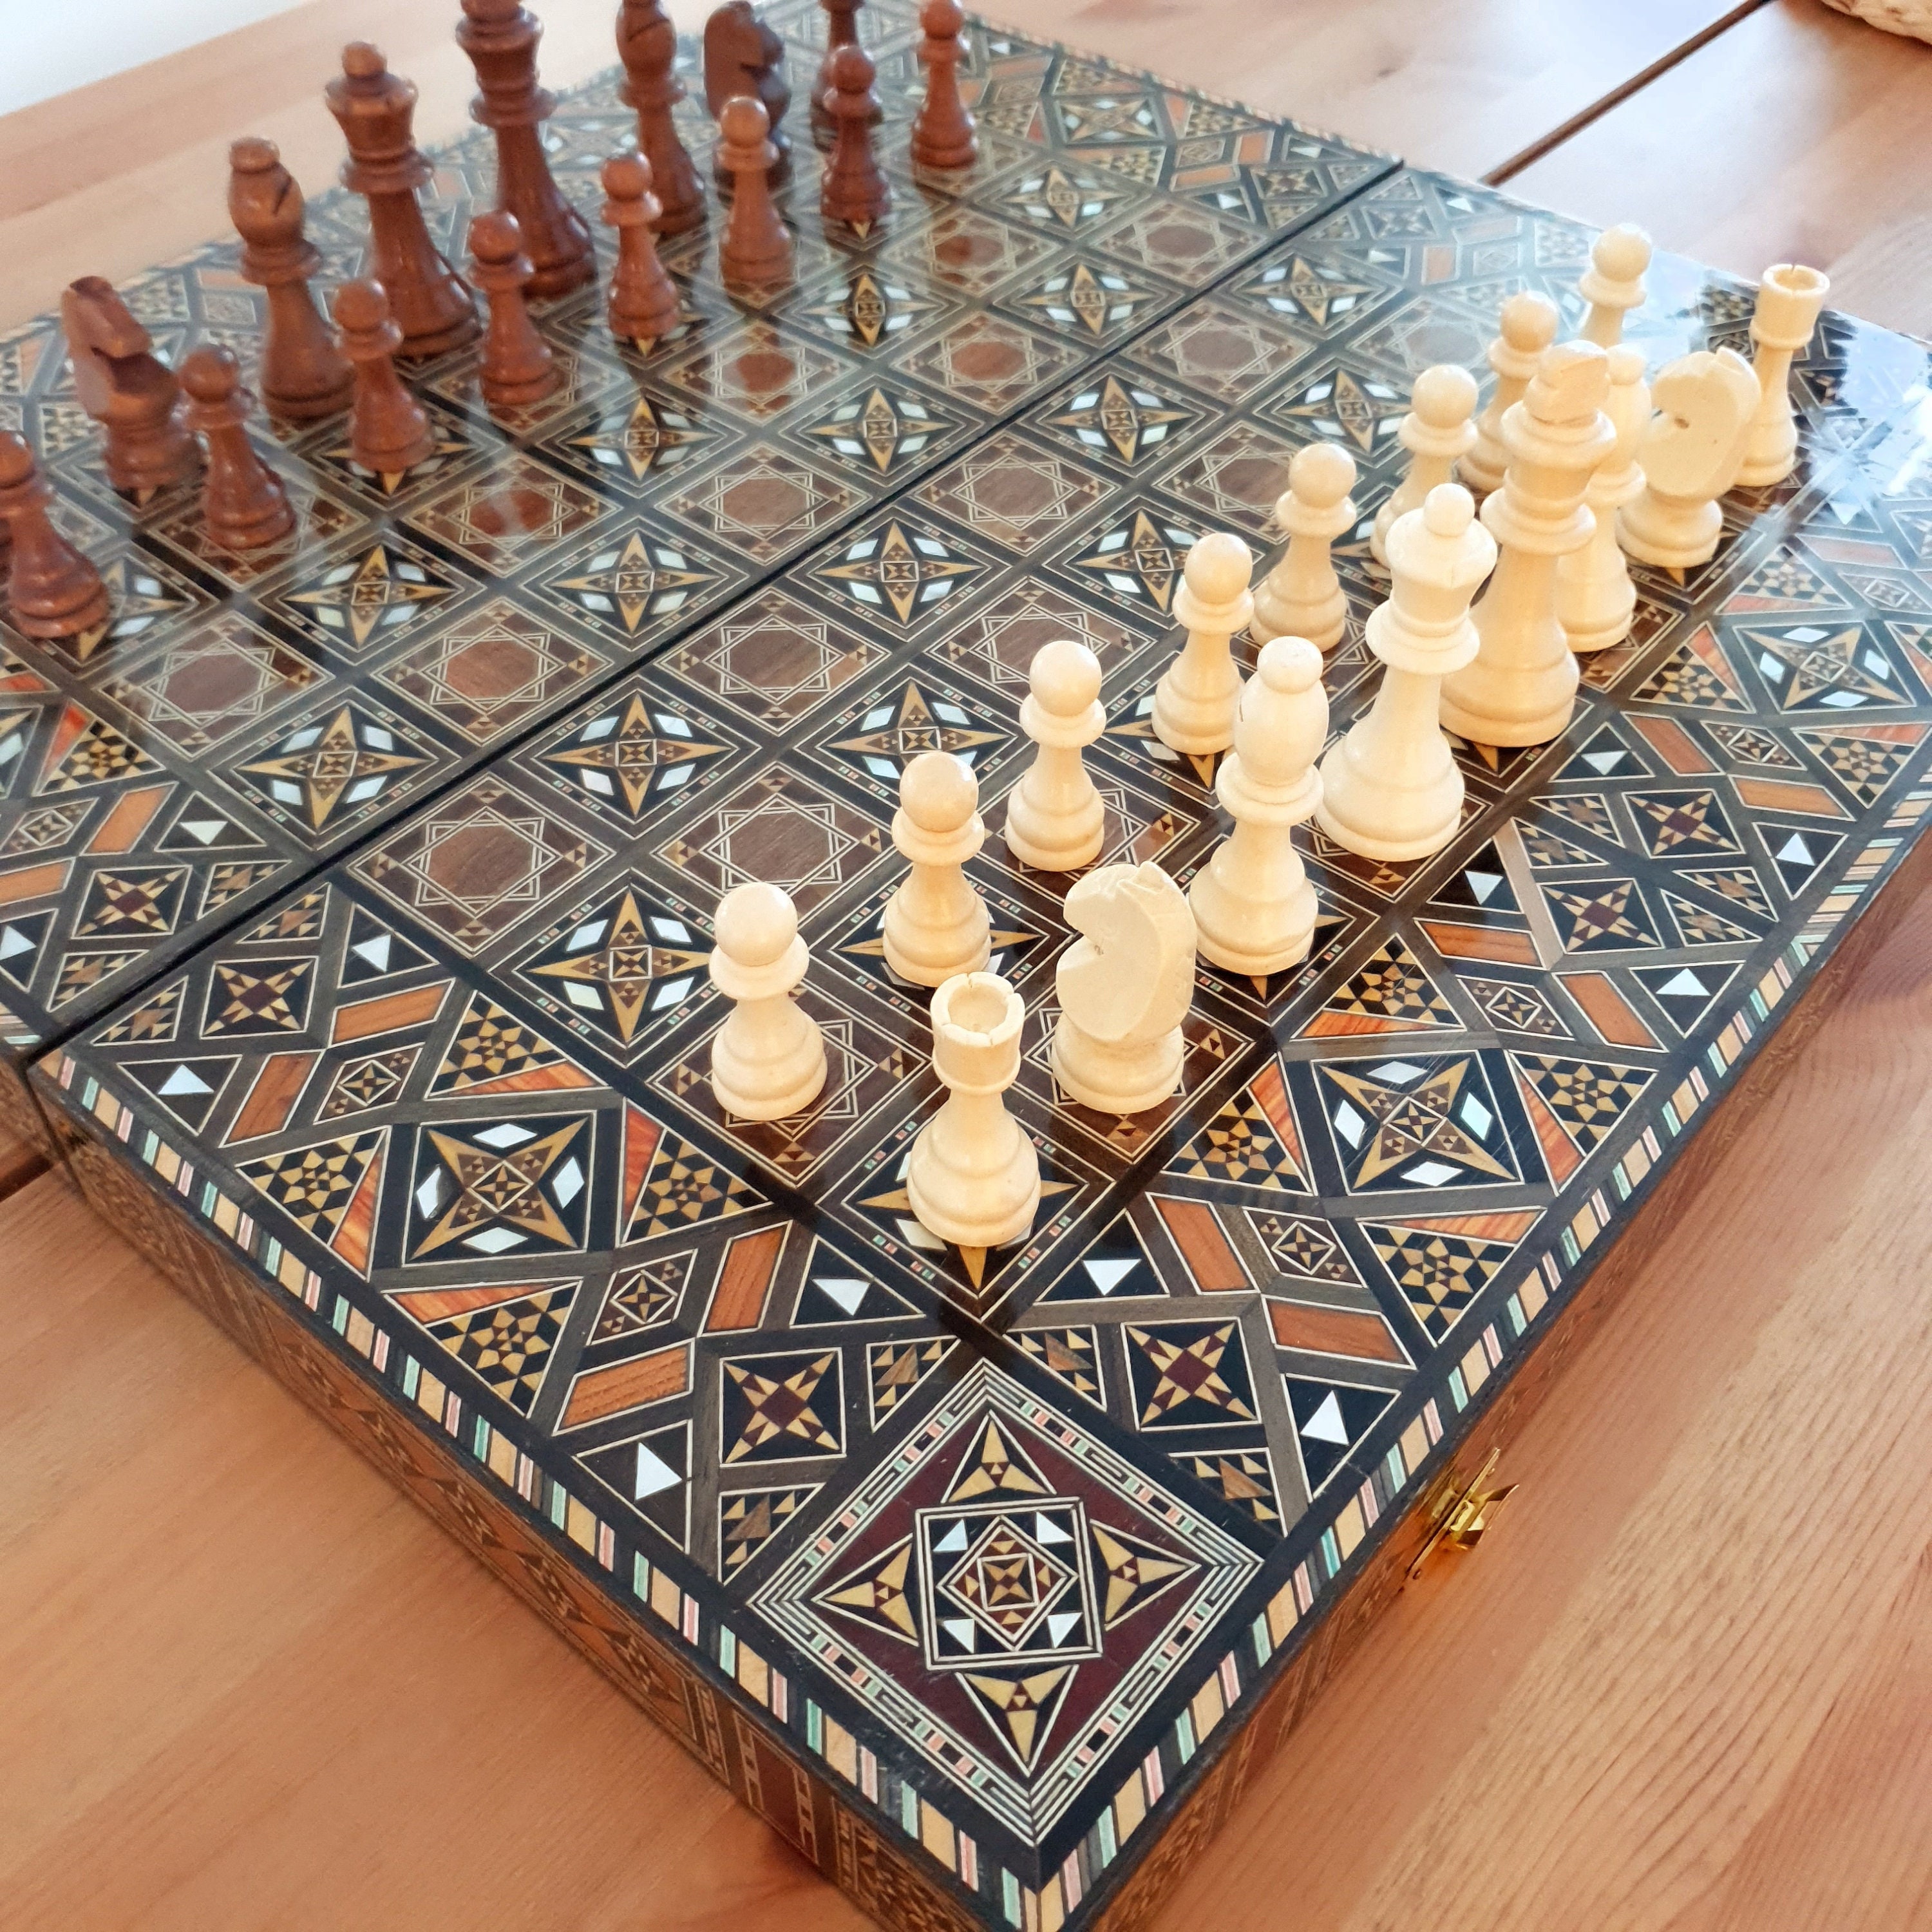 Wooden Chess Set | Master of Chess Set Pearl L Brown | Chess Board 35cm |  Classic Handmade Travel Chess Set for Adults and Kids